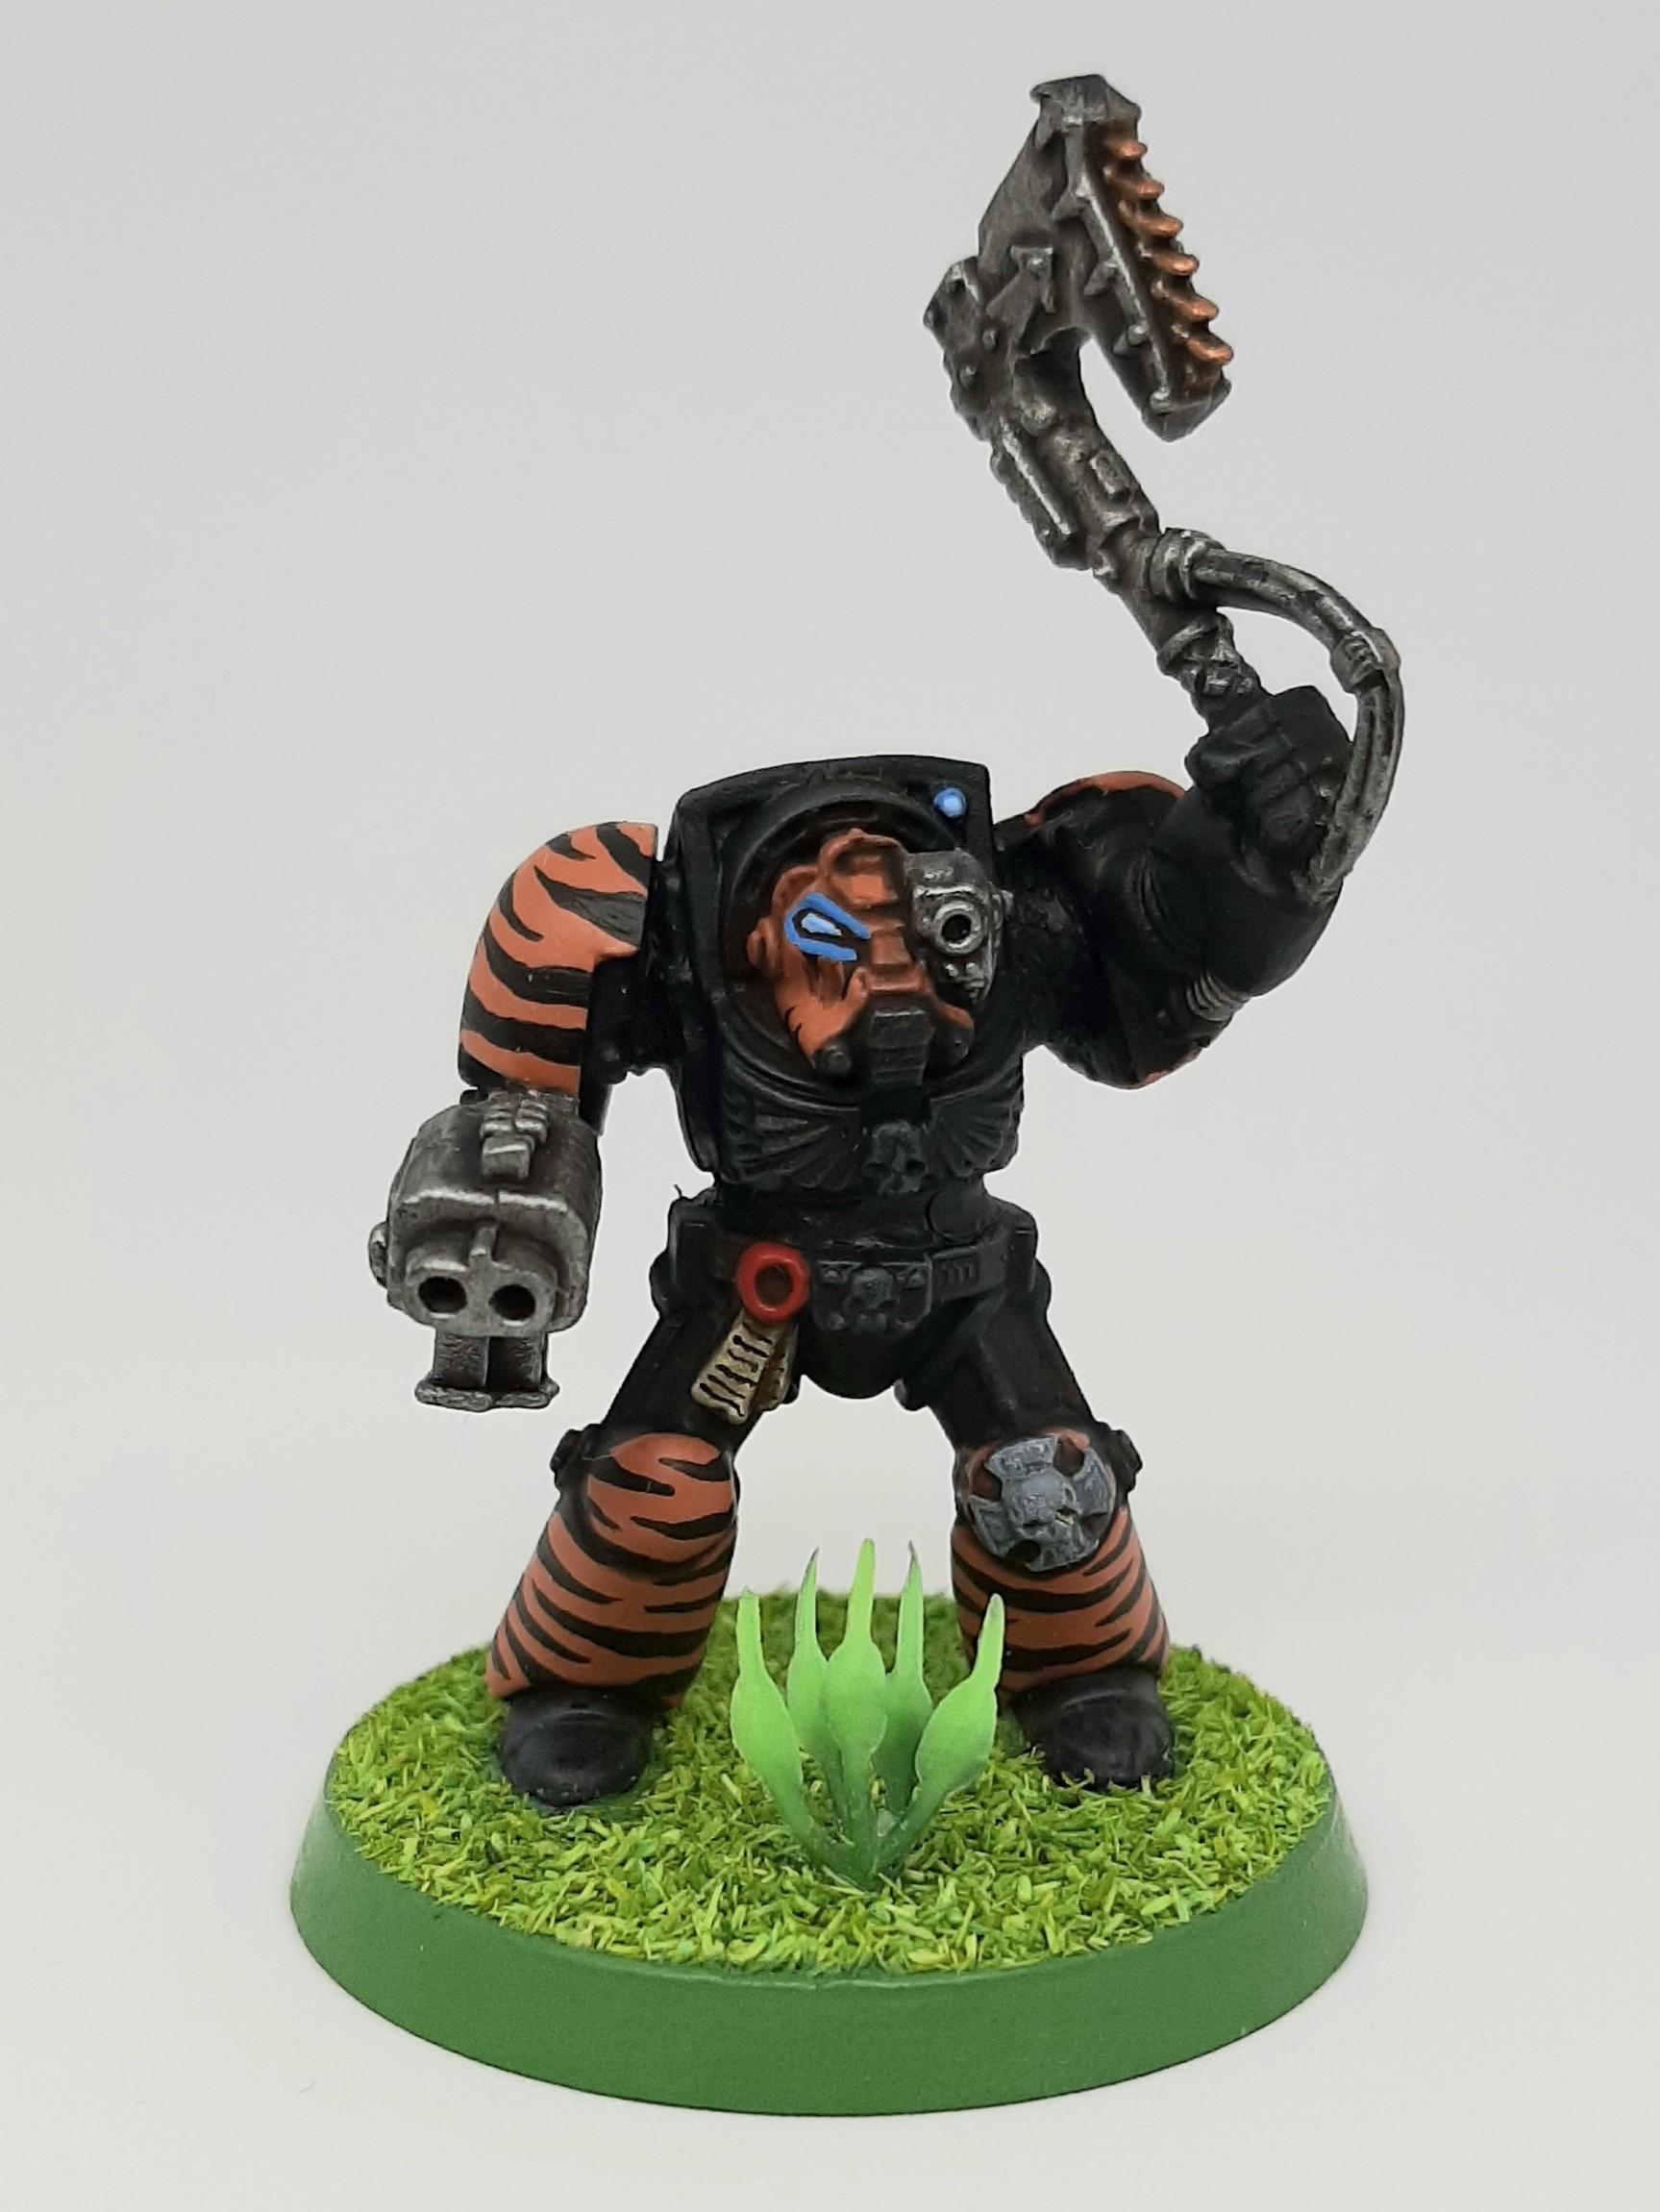 Armor, Black, Camouflage, Chainaxe, Conversion, Crux, Custom, Dreadnought, Fighting, Fist, Forest, Jungle, Kitbash, Modified, Orange, Power, Space, Space Marines, Stormbolter, Striped, Stripes, Tactical, Terminator Armor, Terminatus, Tigers, Trees, Veda